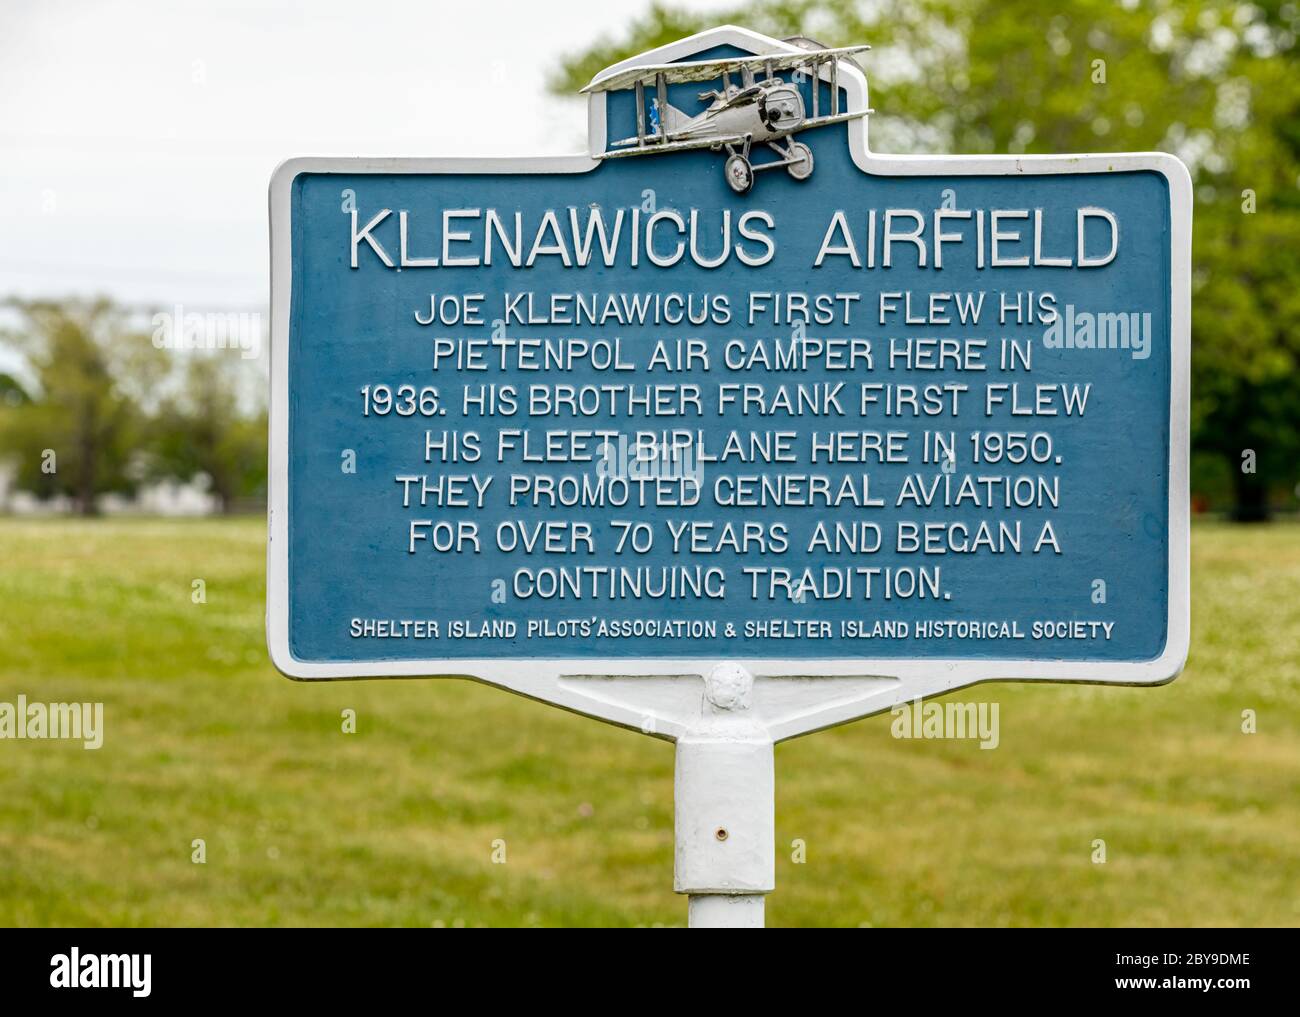 Historical sign at Klenawicus Airfield, Shelter Island, NY Stock Photo